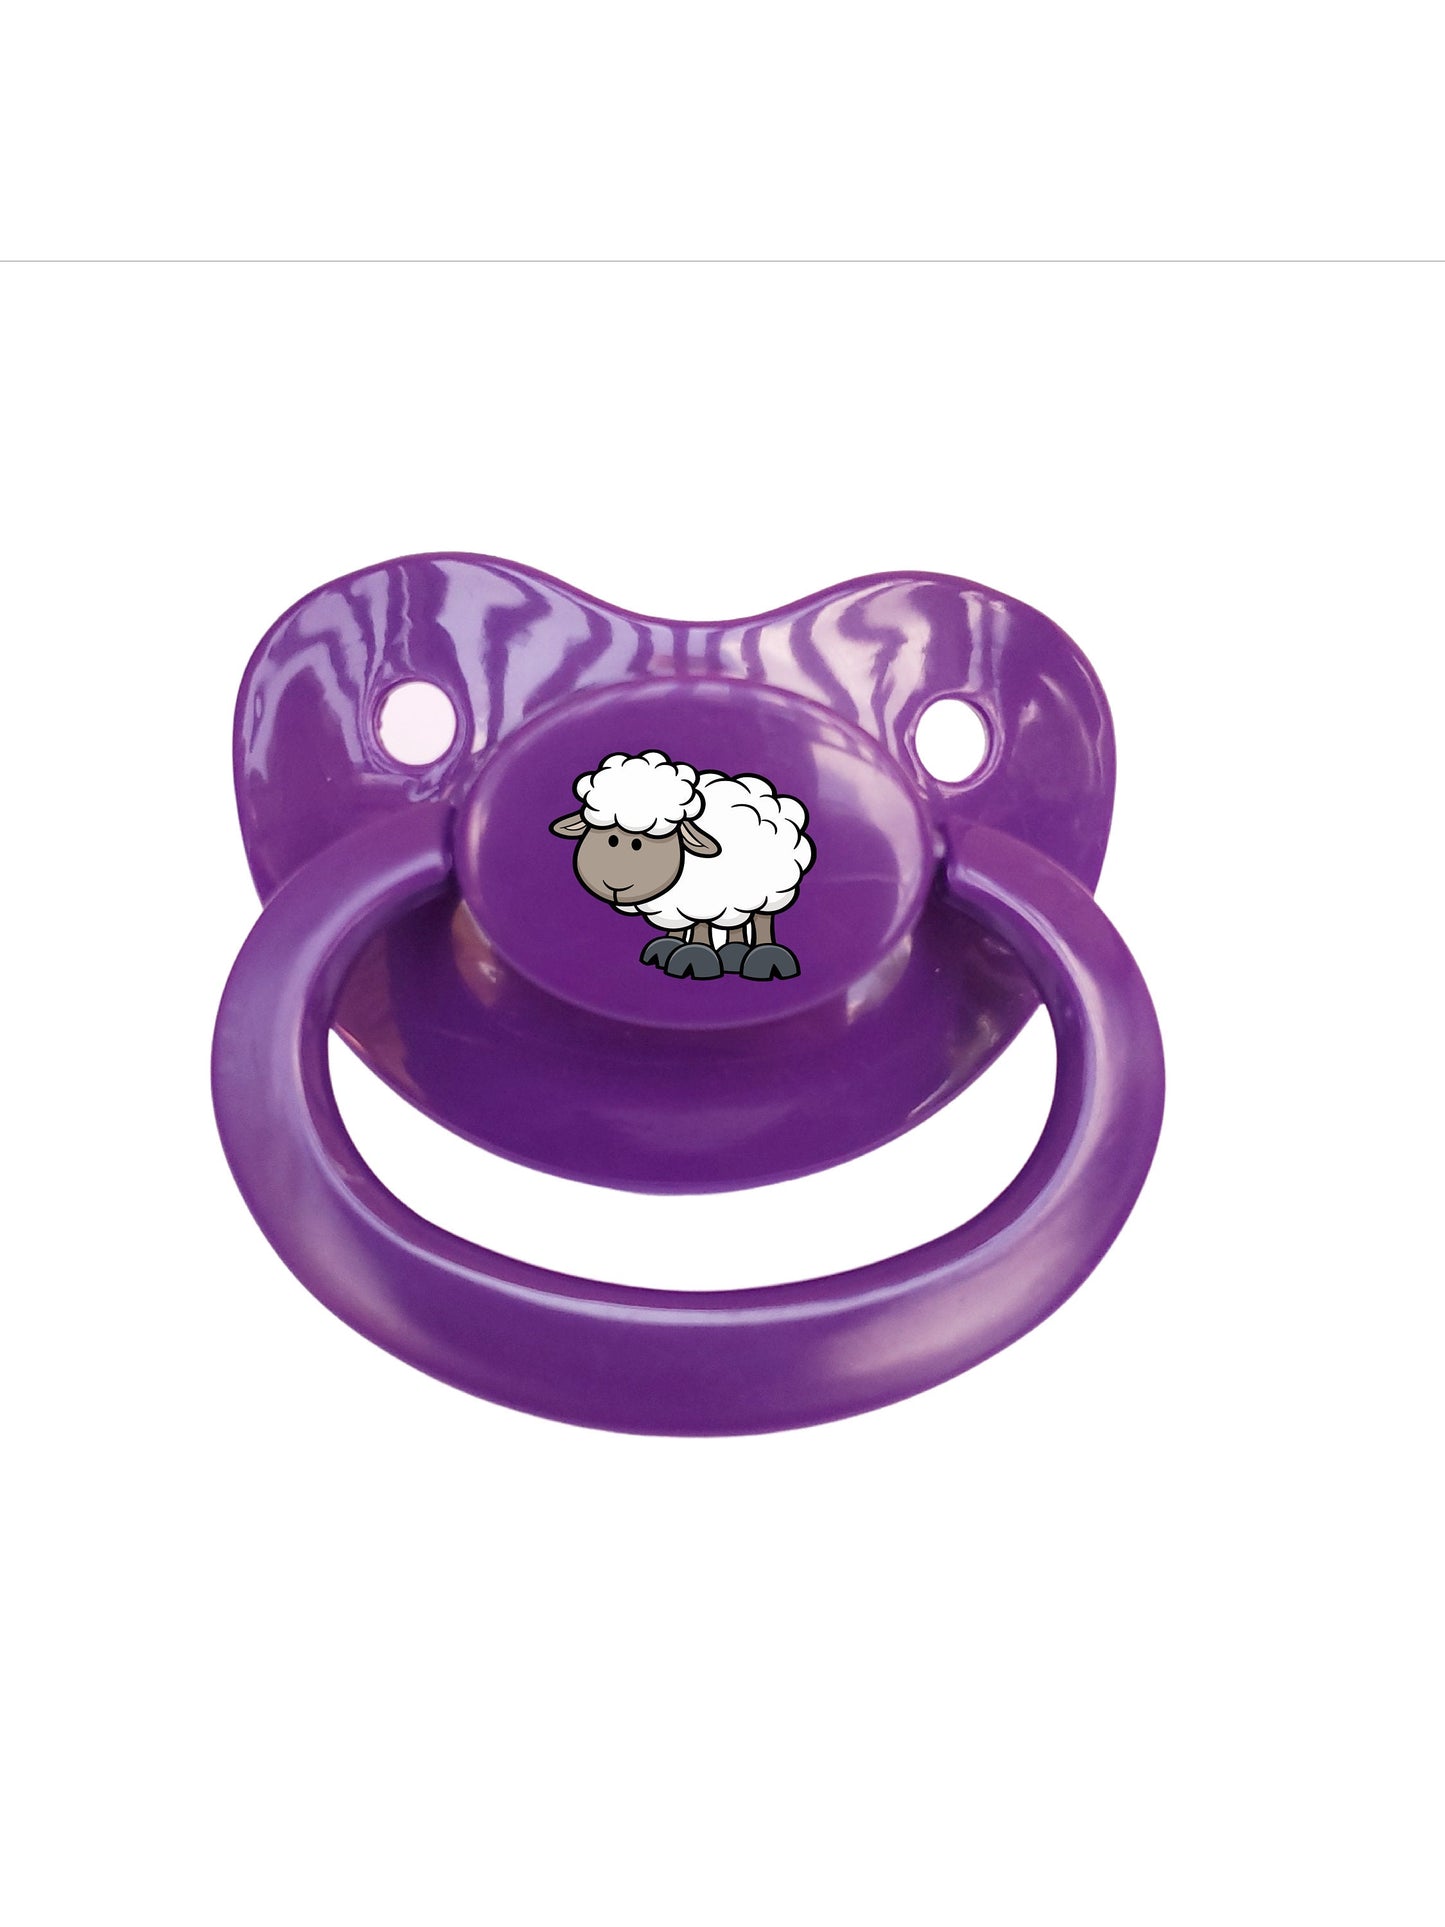 Sheep Adult Pacifier